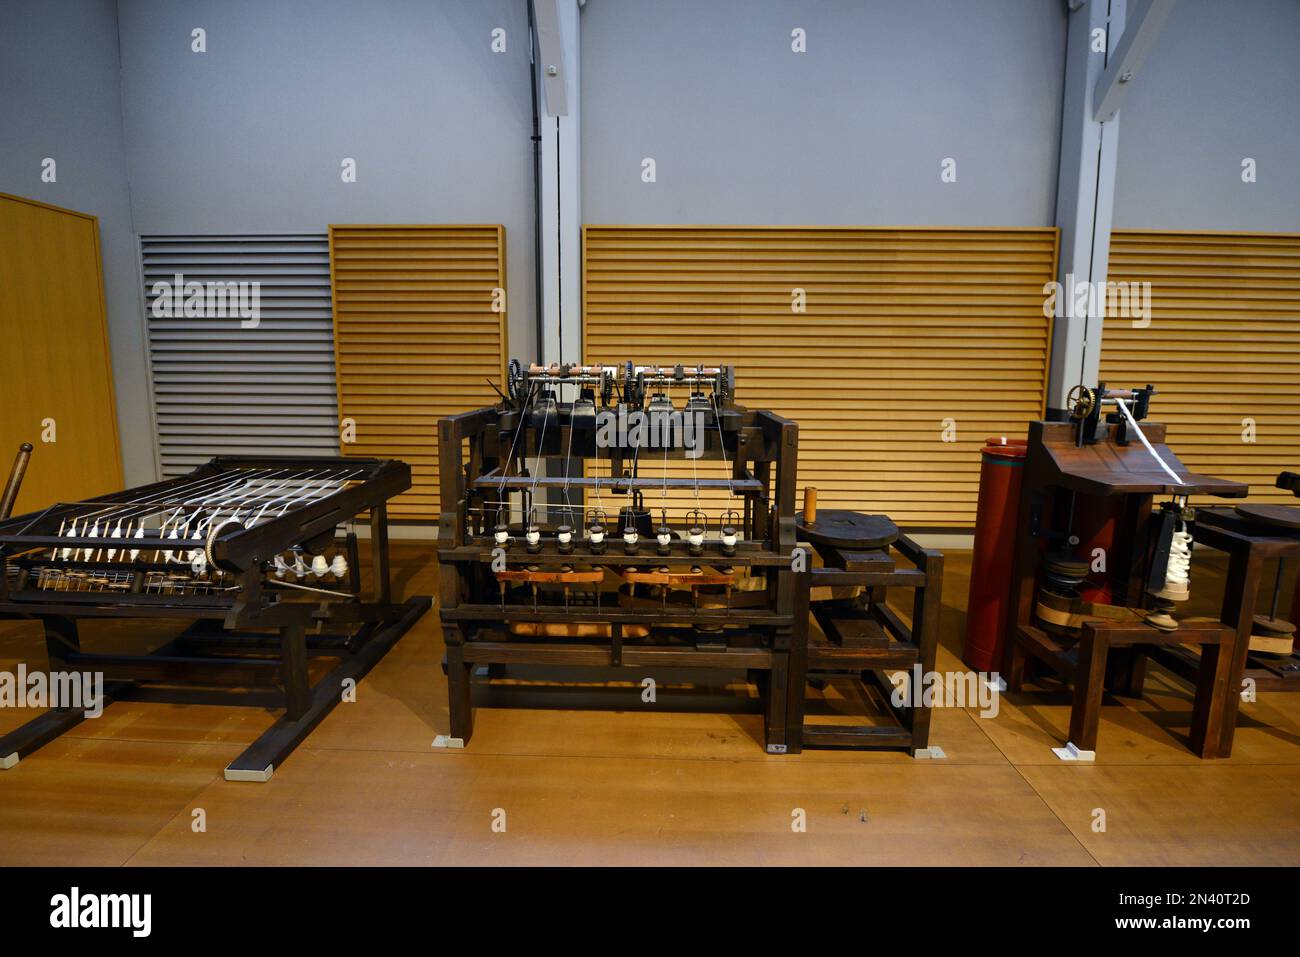 Padiglione macchine tessili nel Toyota Commemorative Museum of Industry and Technology a Nagoya, Giappone. Foto Stock